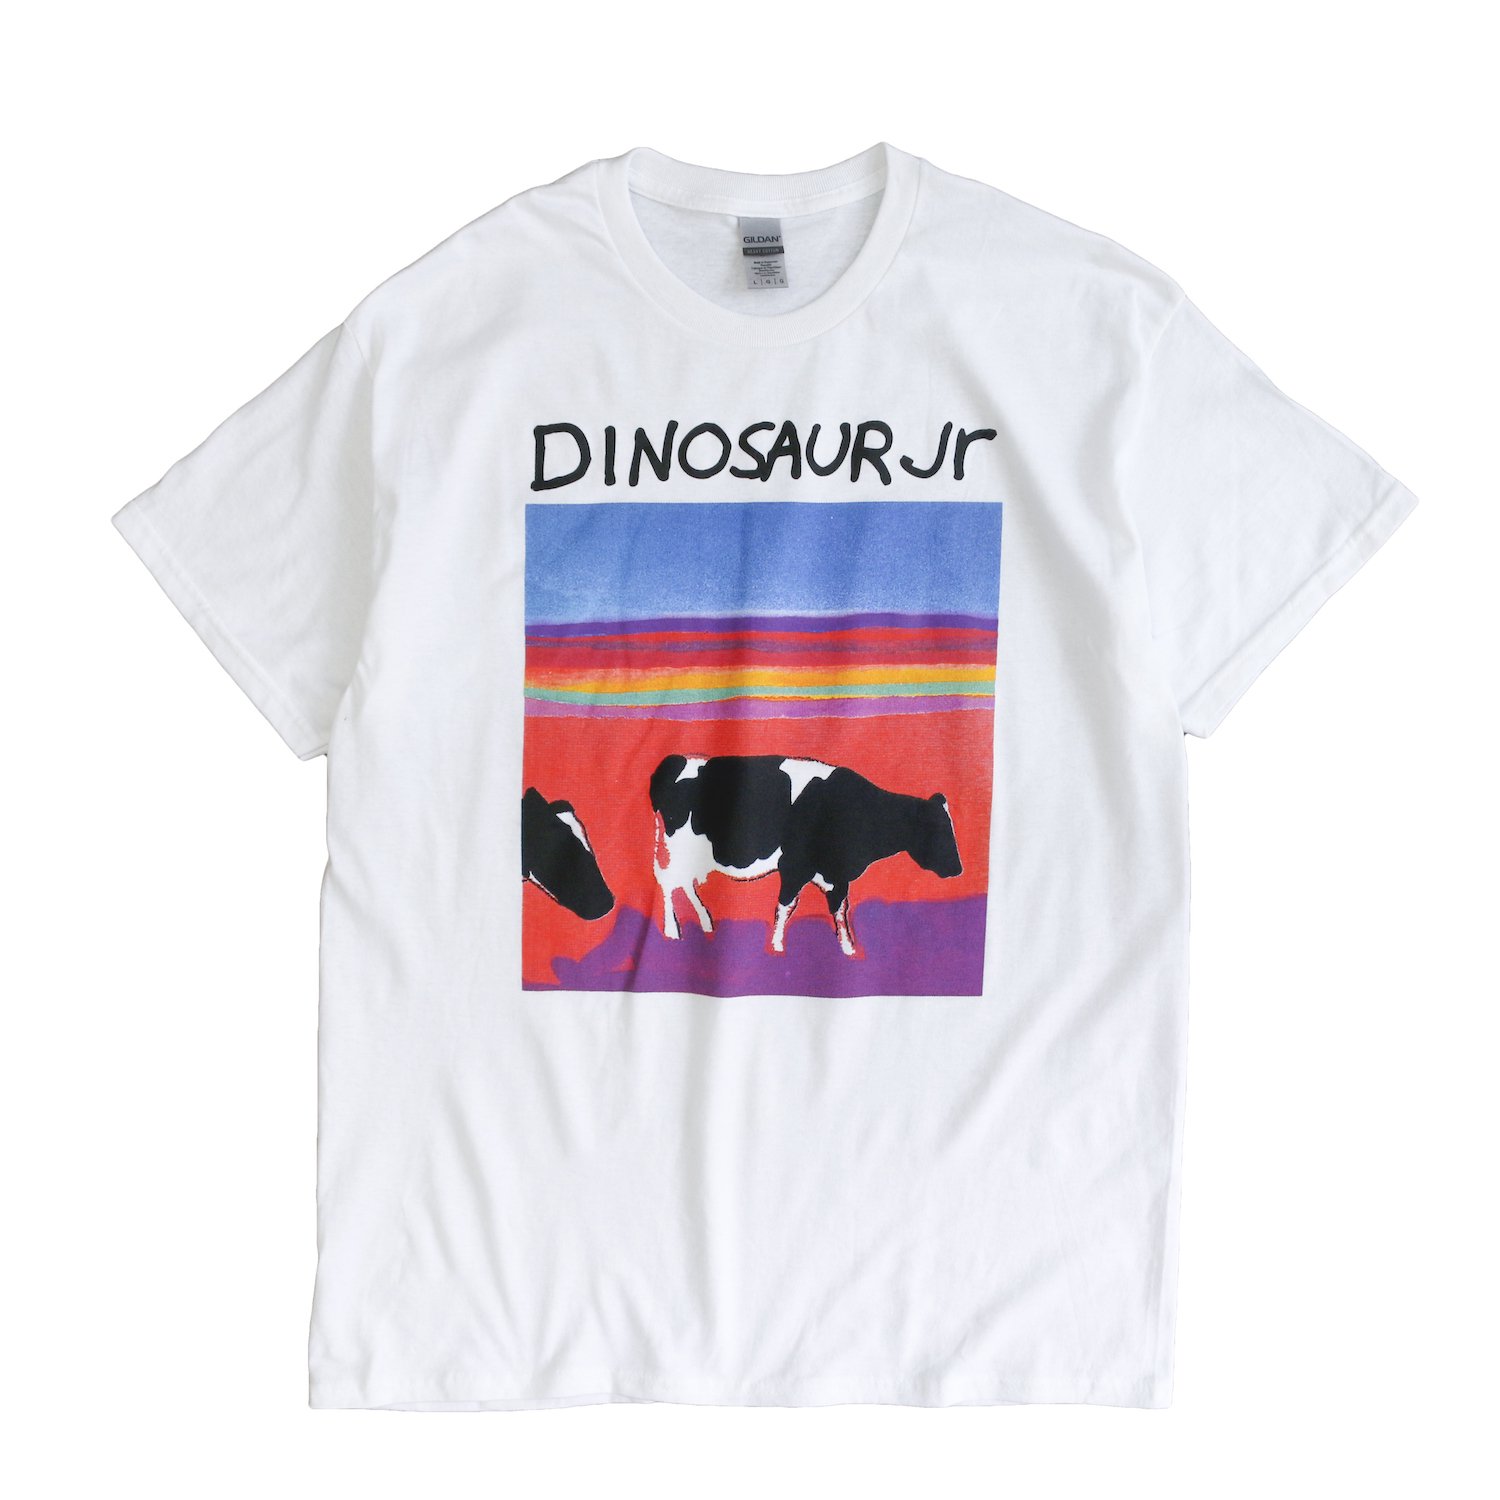 <img class='new_mark_img1' src='https://img.shop-pro.jp/img/new/icons8.gif' style='border:none;display:inline;margin:0px;padding:0px;width:auto;' />Music Tee / S/S  TEE DINOSAUR JR 